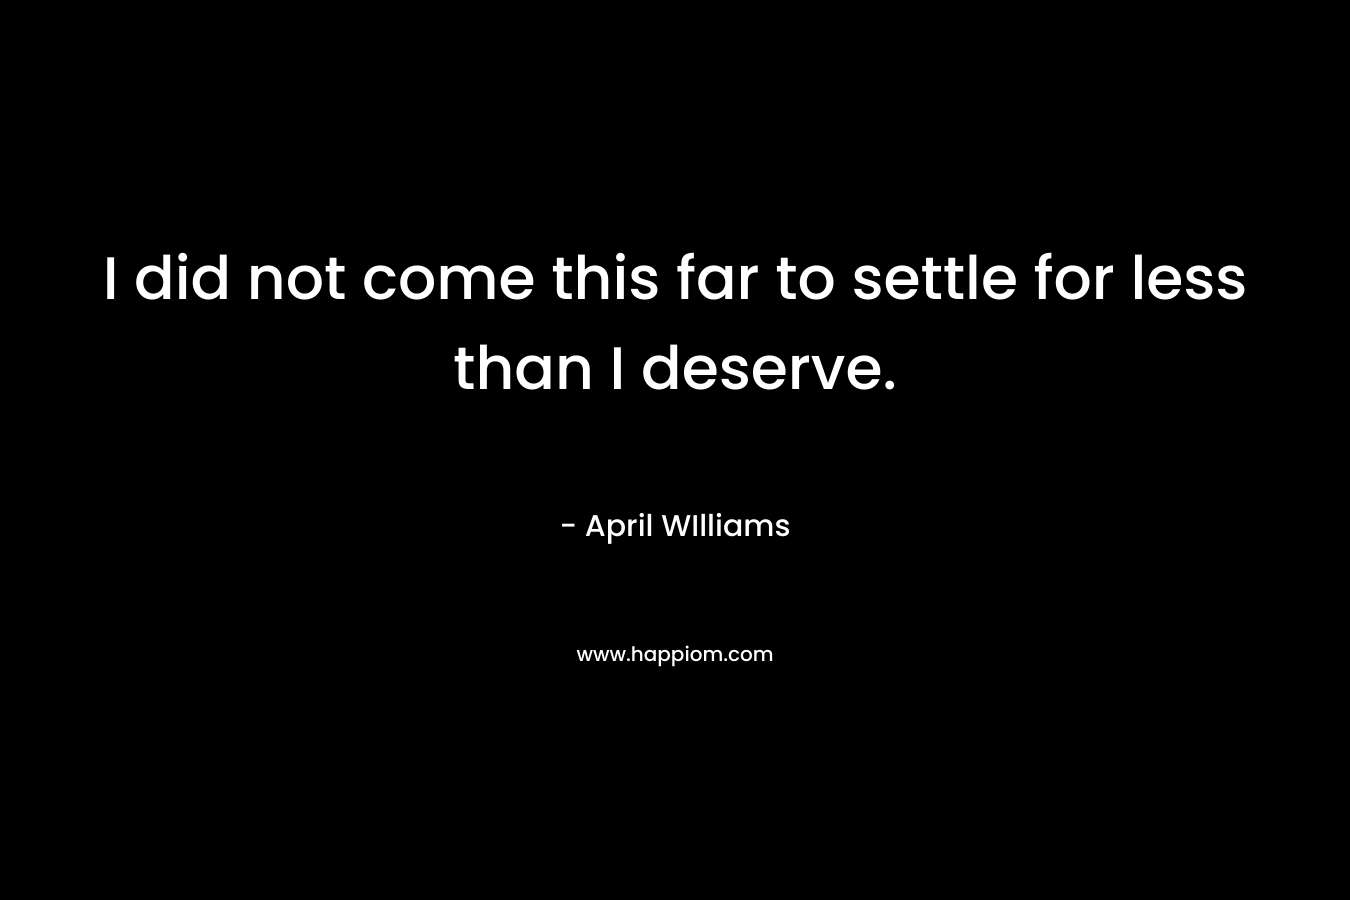 I did not come this far to settle for less than I deserve.